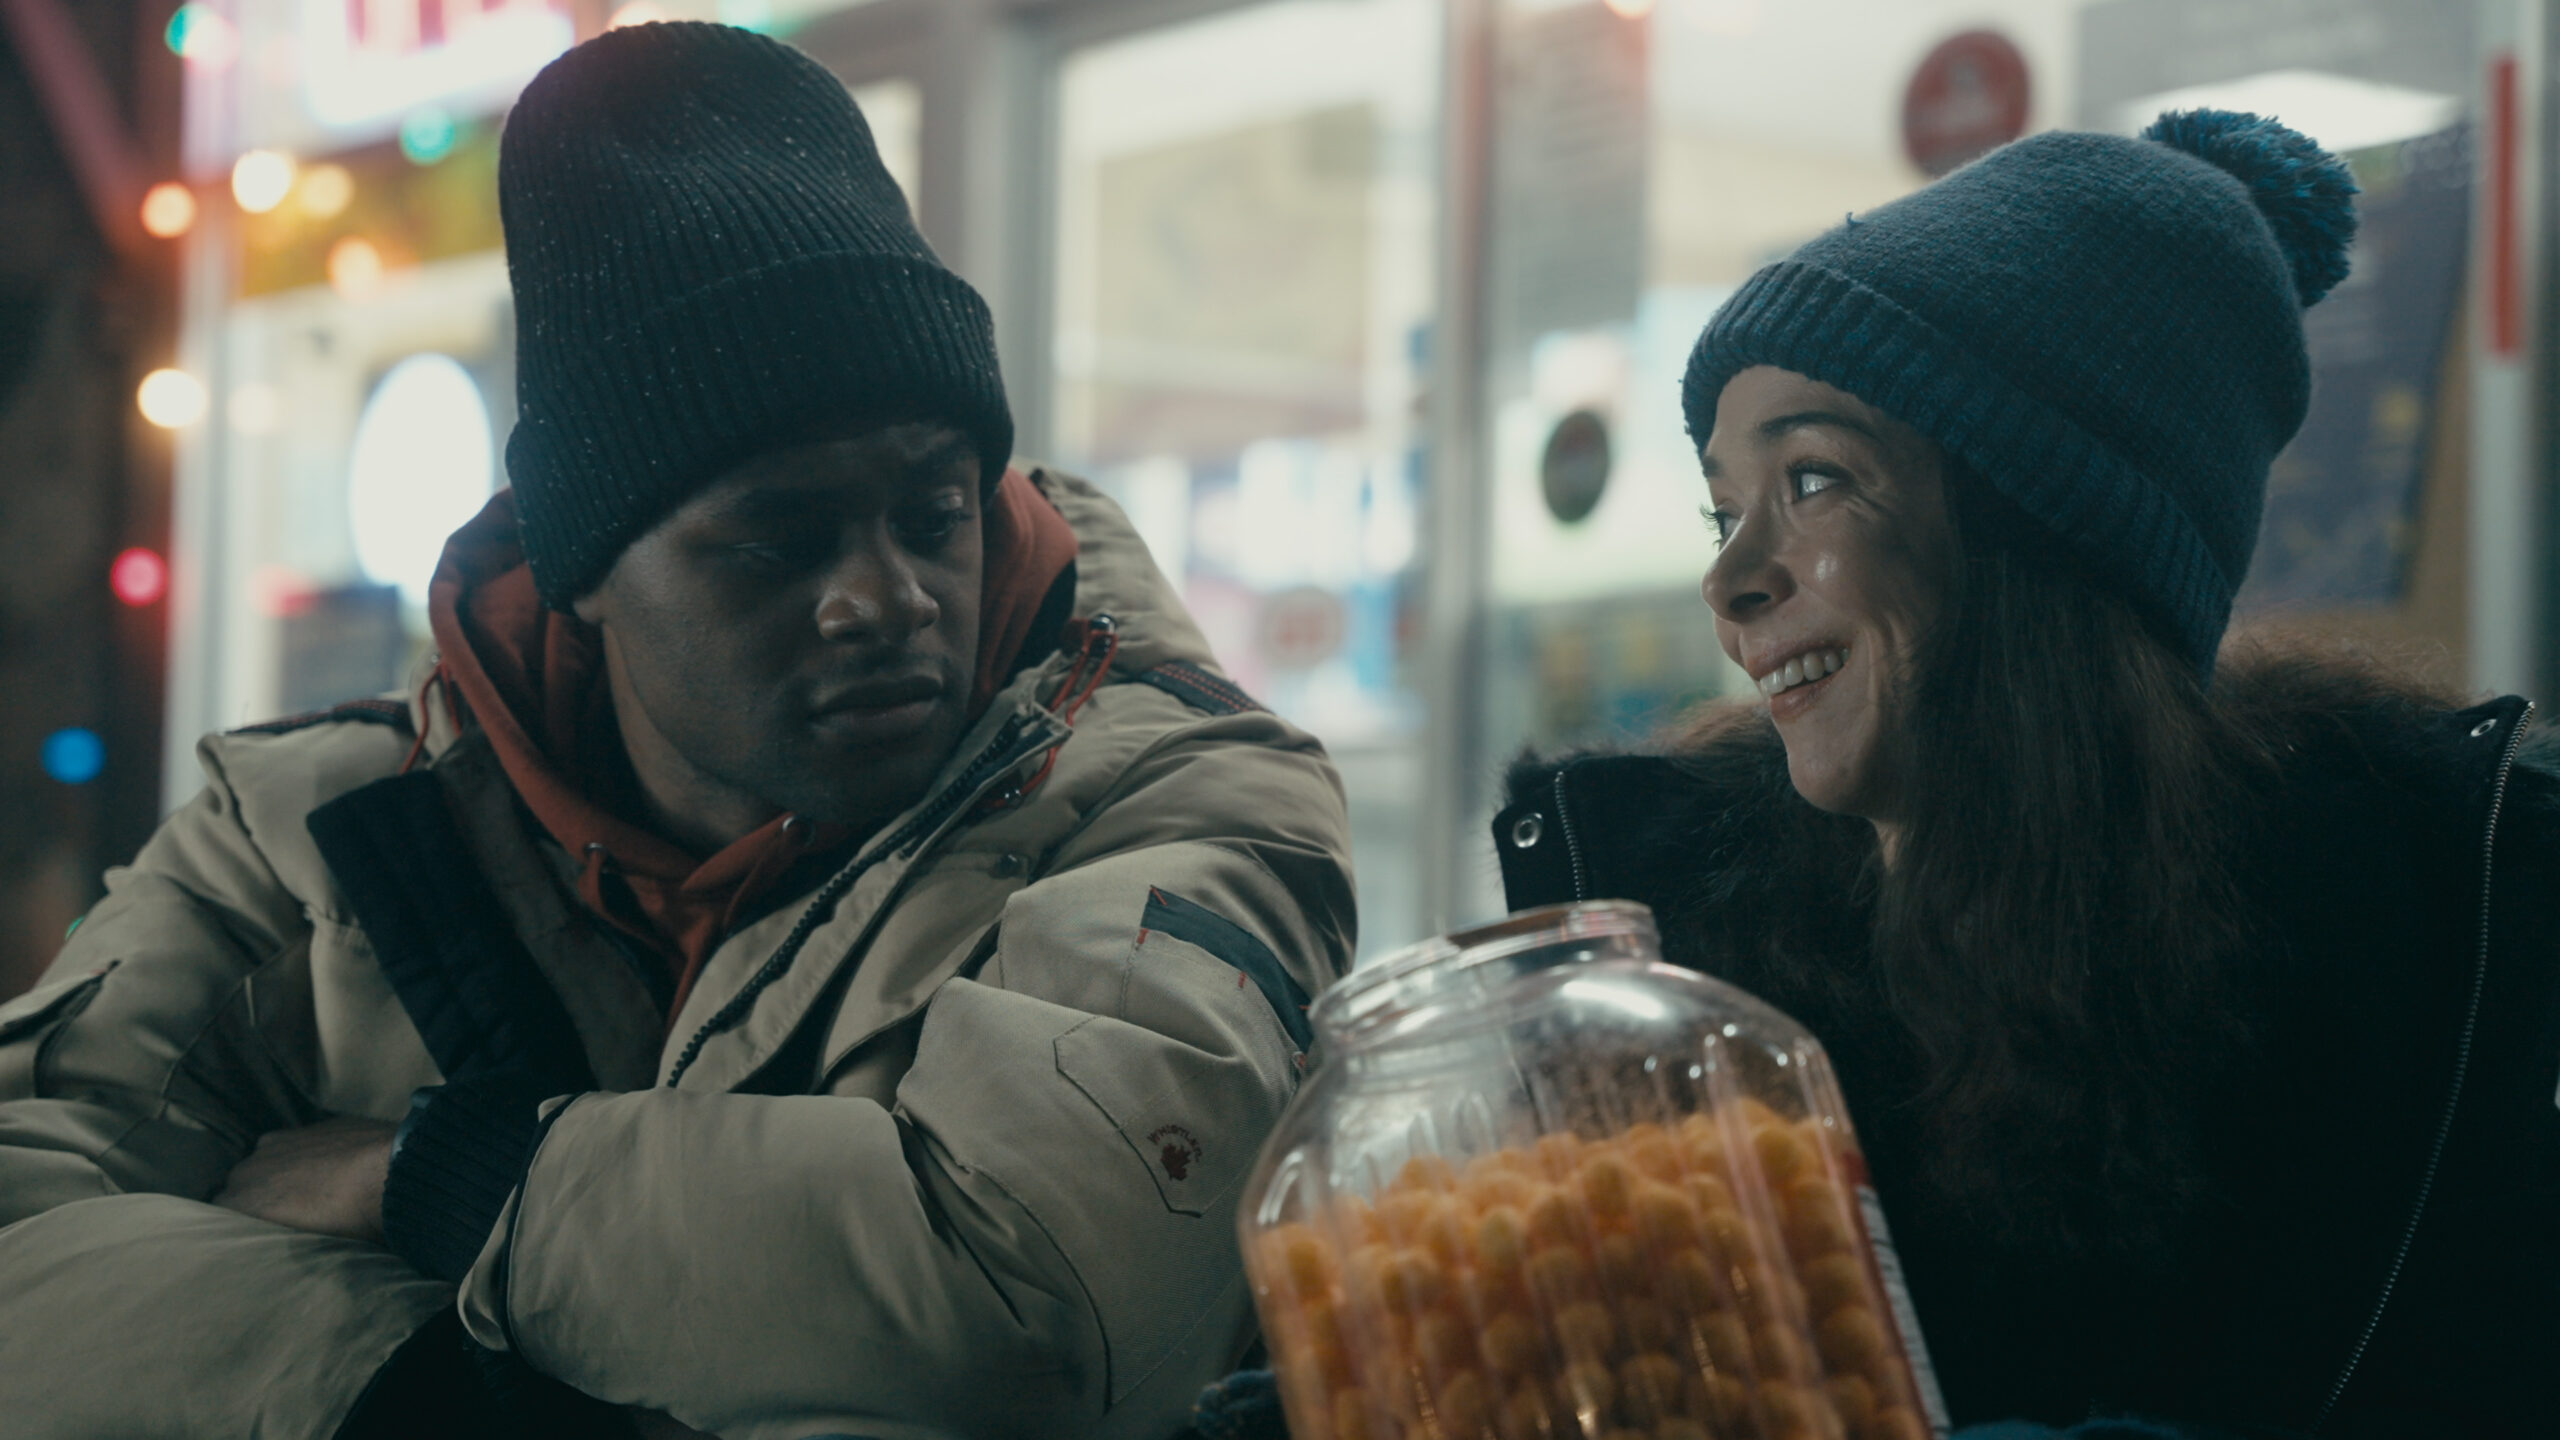 two people dressed in winter coats and hats share snacks outside